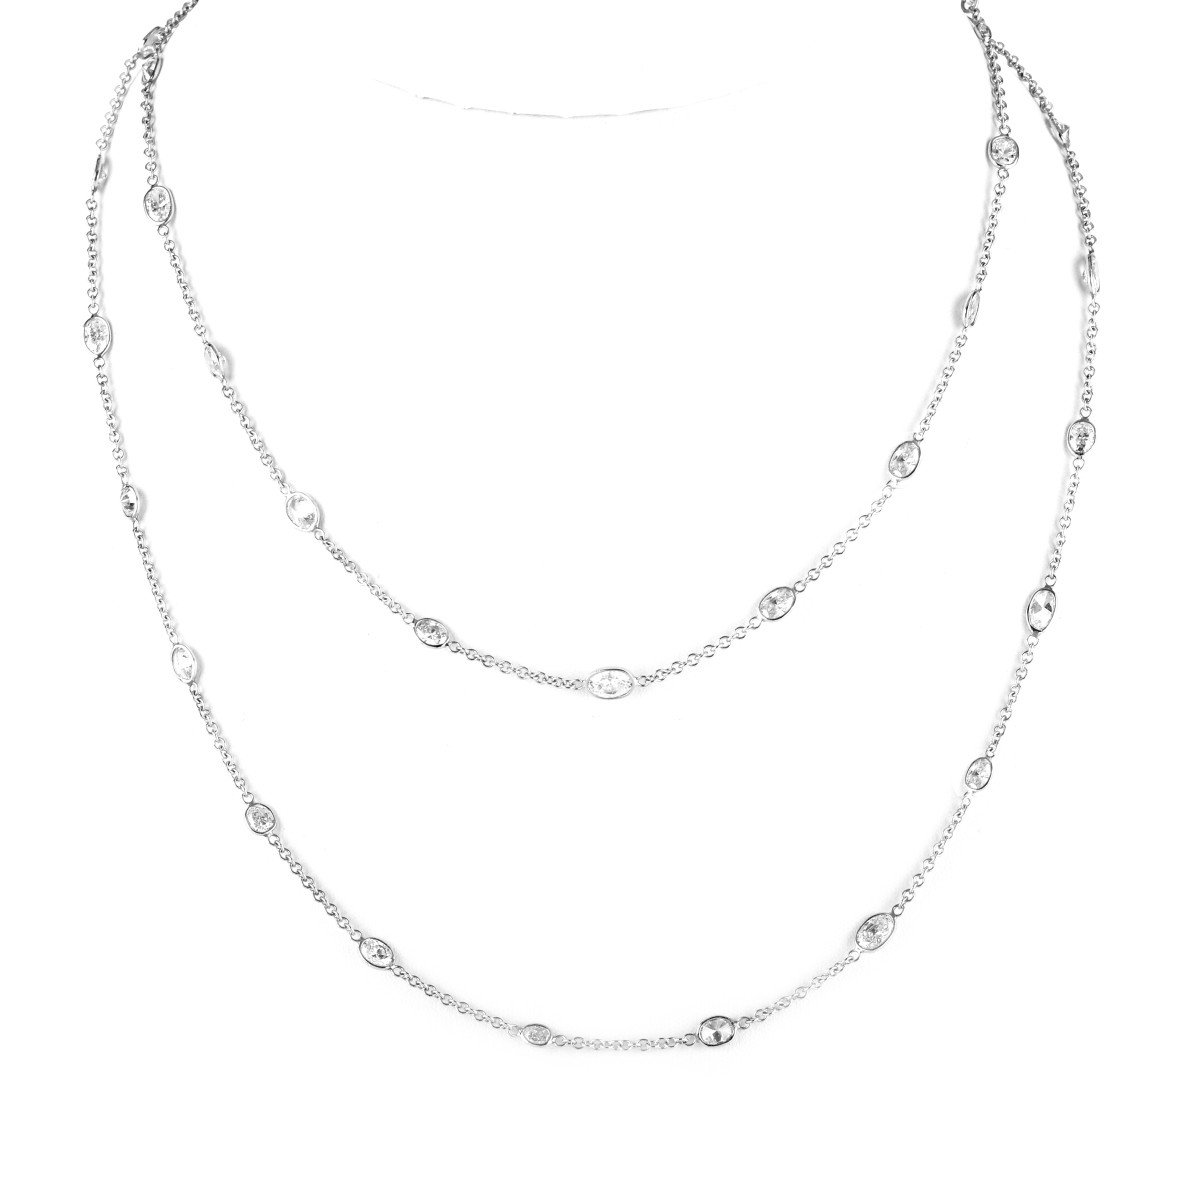 36" Long Diamond and 18K Gold Necklace